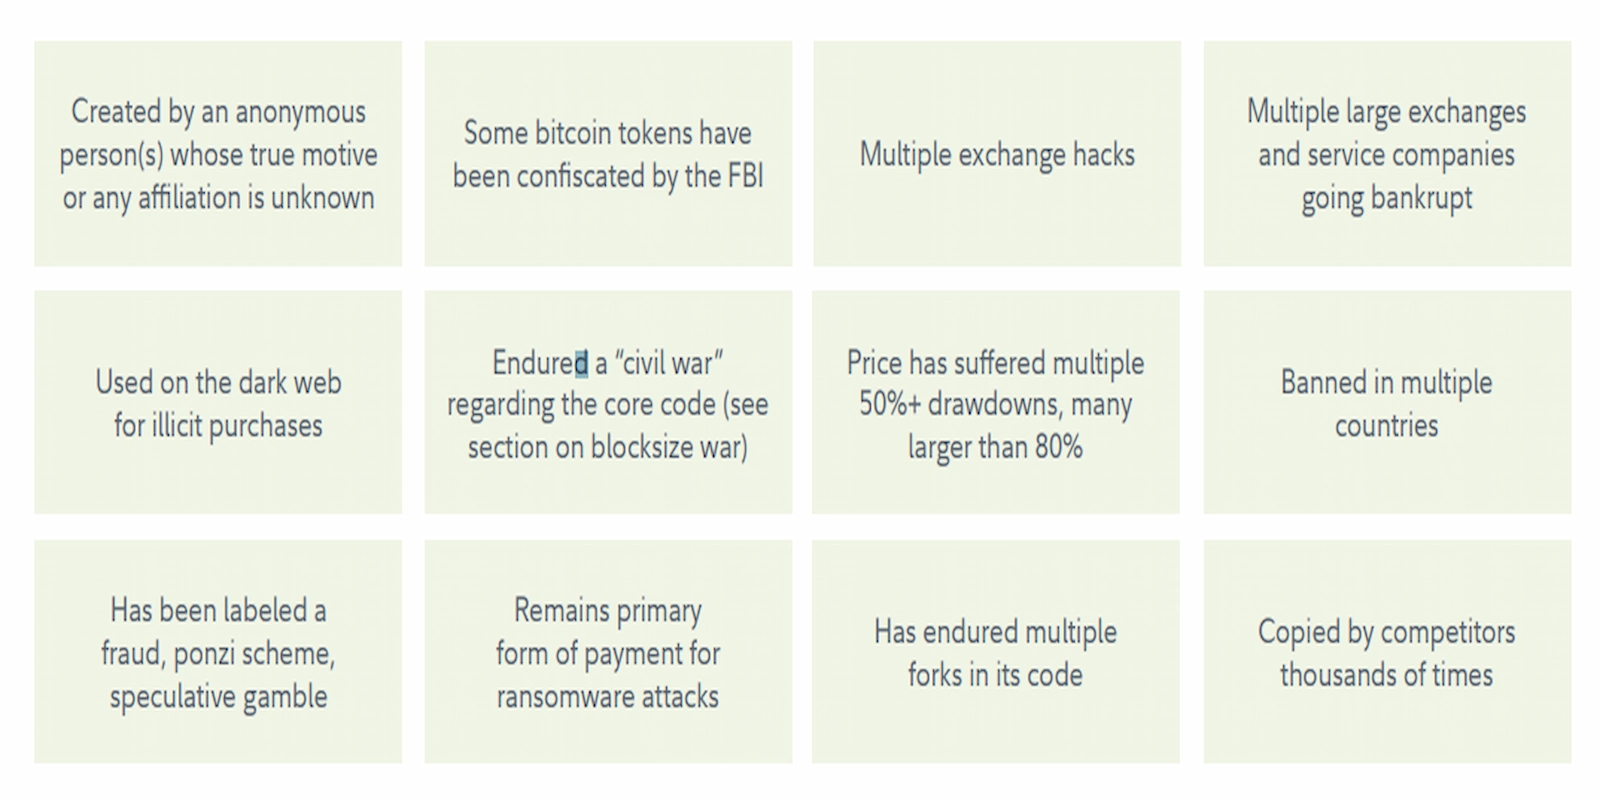 Some of the negative events that Bitcoin has survived